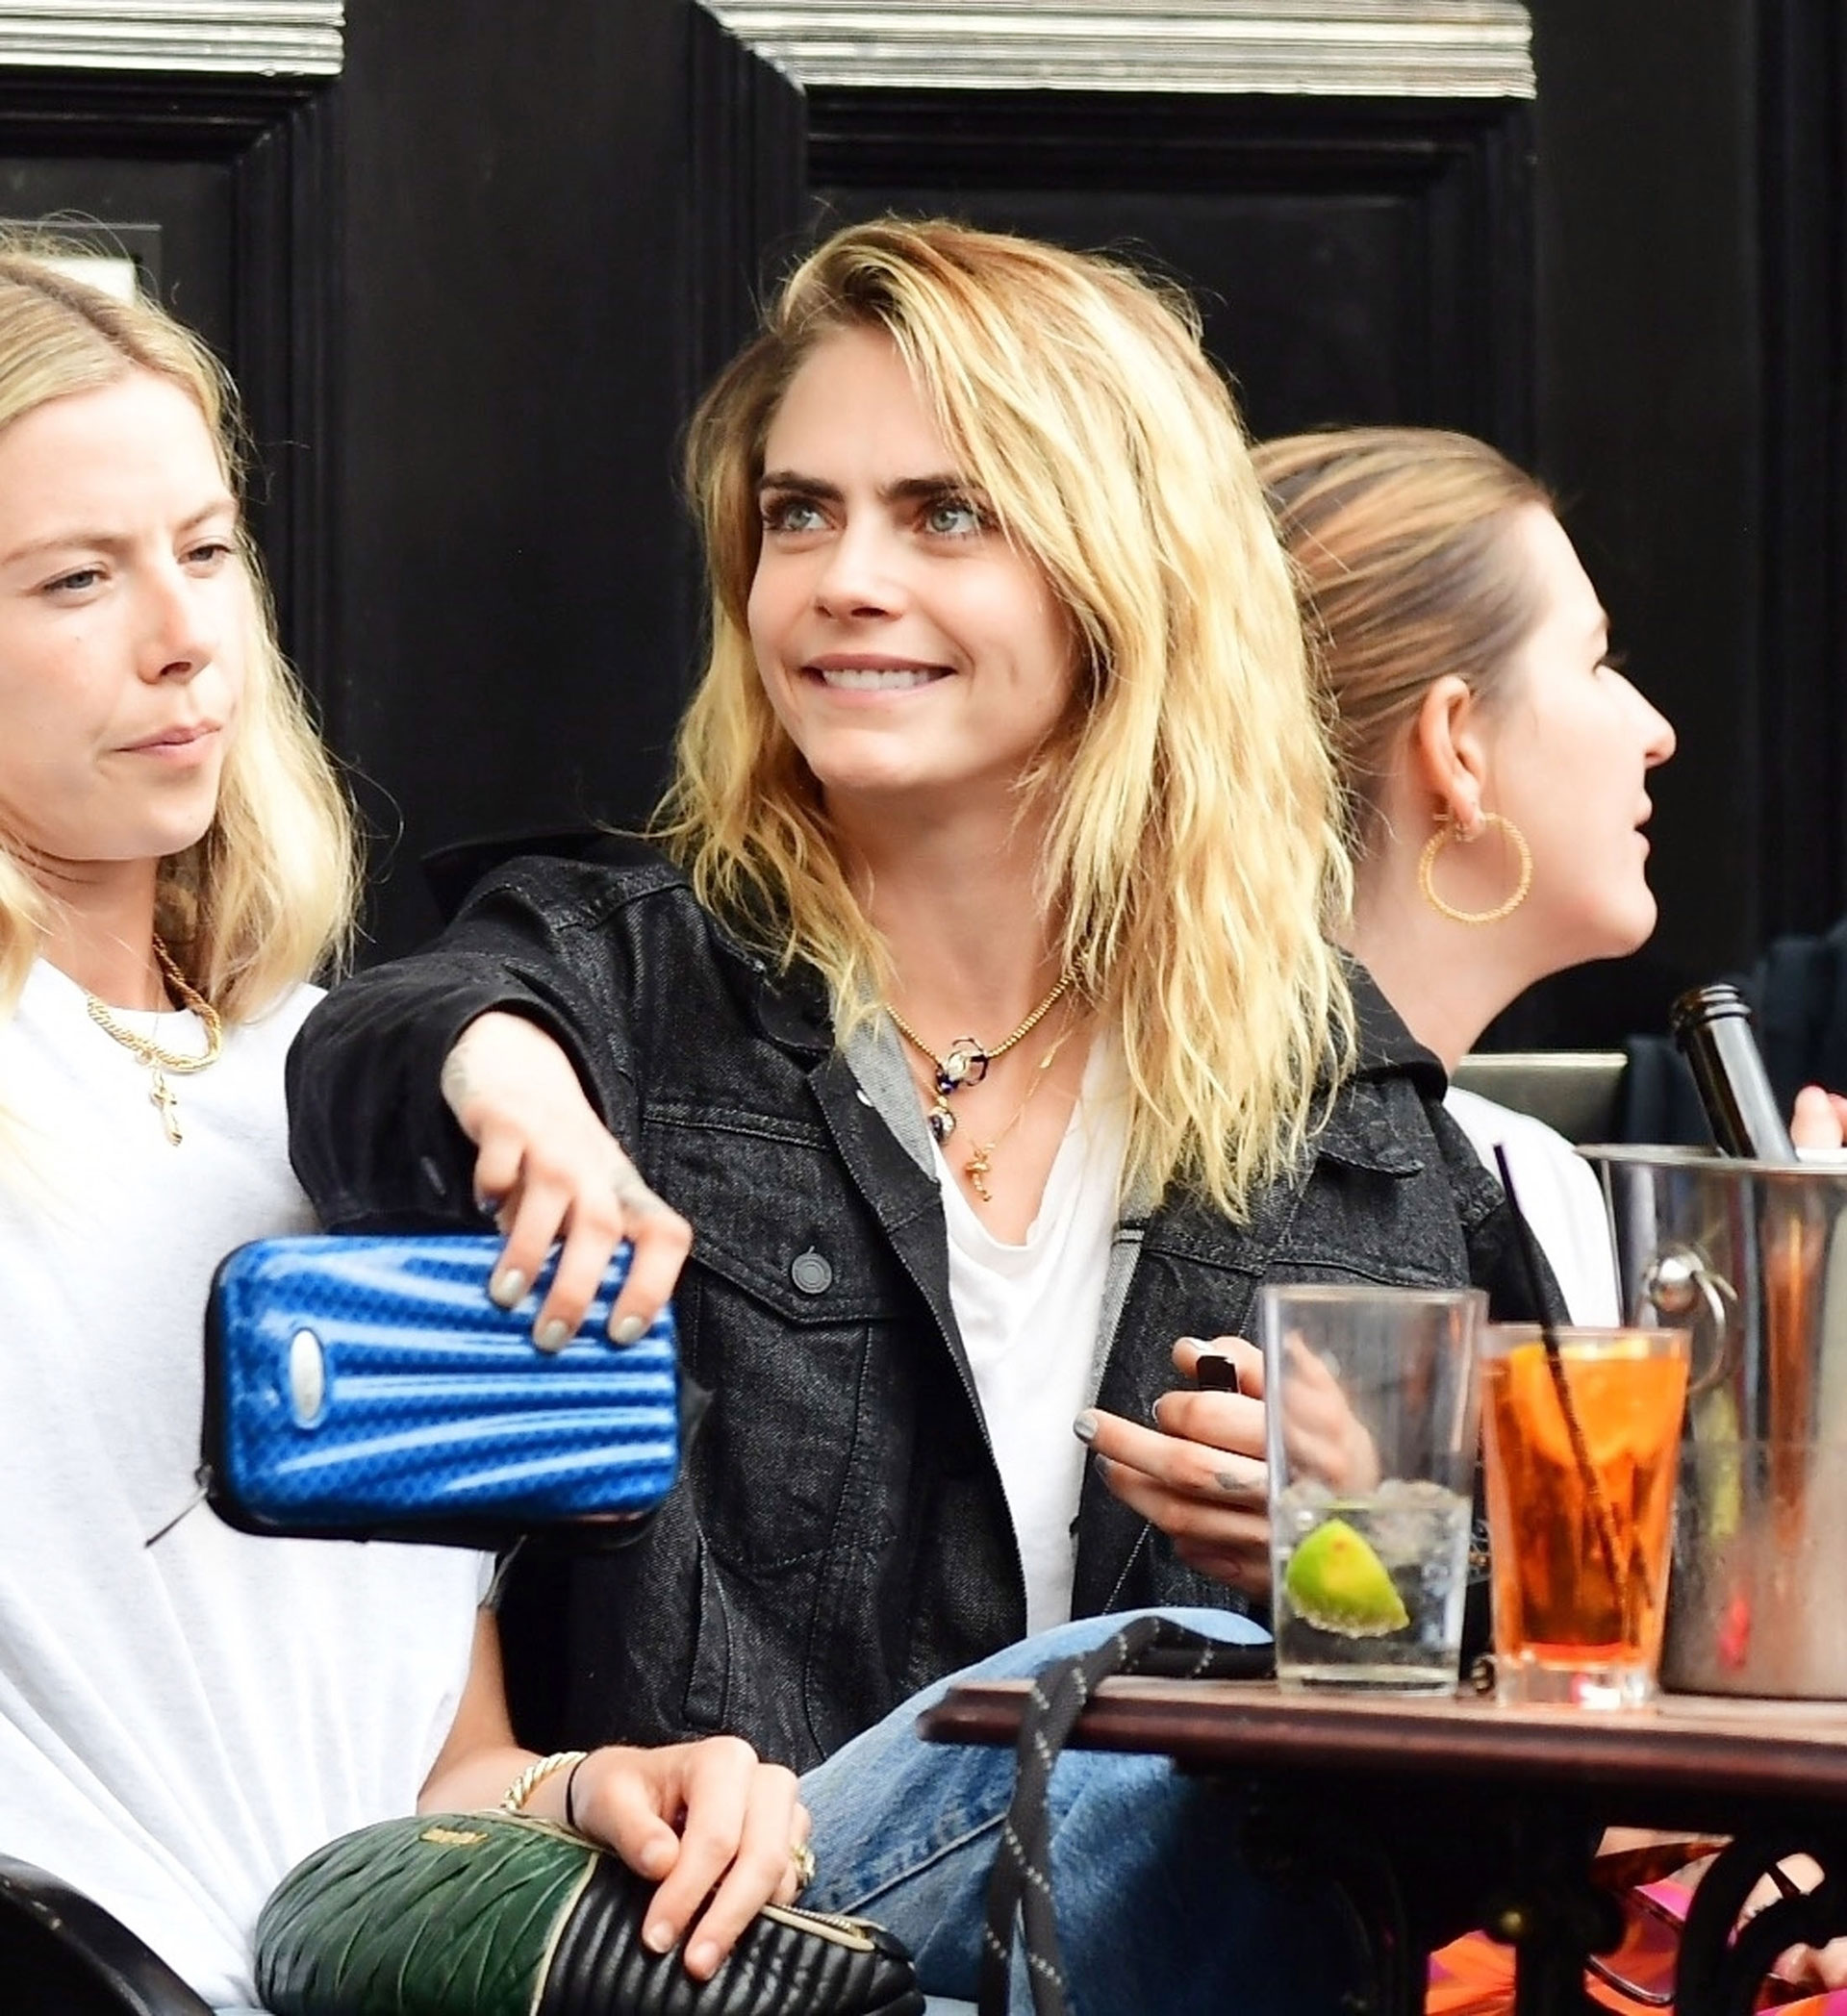 British model Cara Delevingne enjoys a few drinks with friends in a pub in Notting Hill, London (Photo: The Grosby Group)